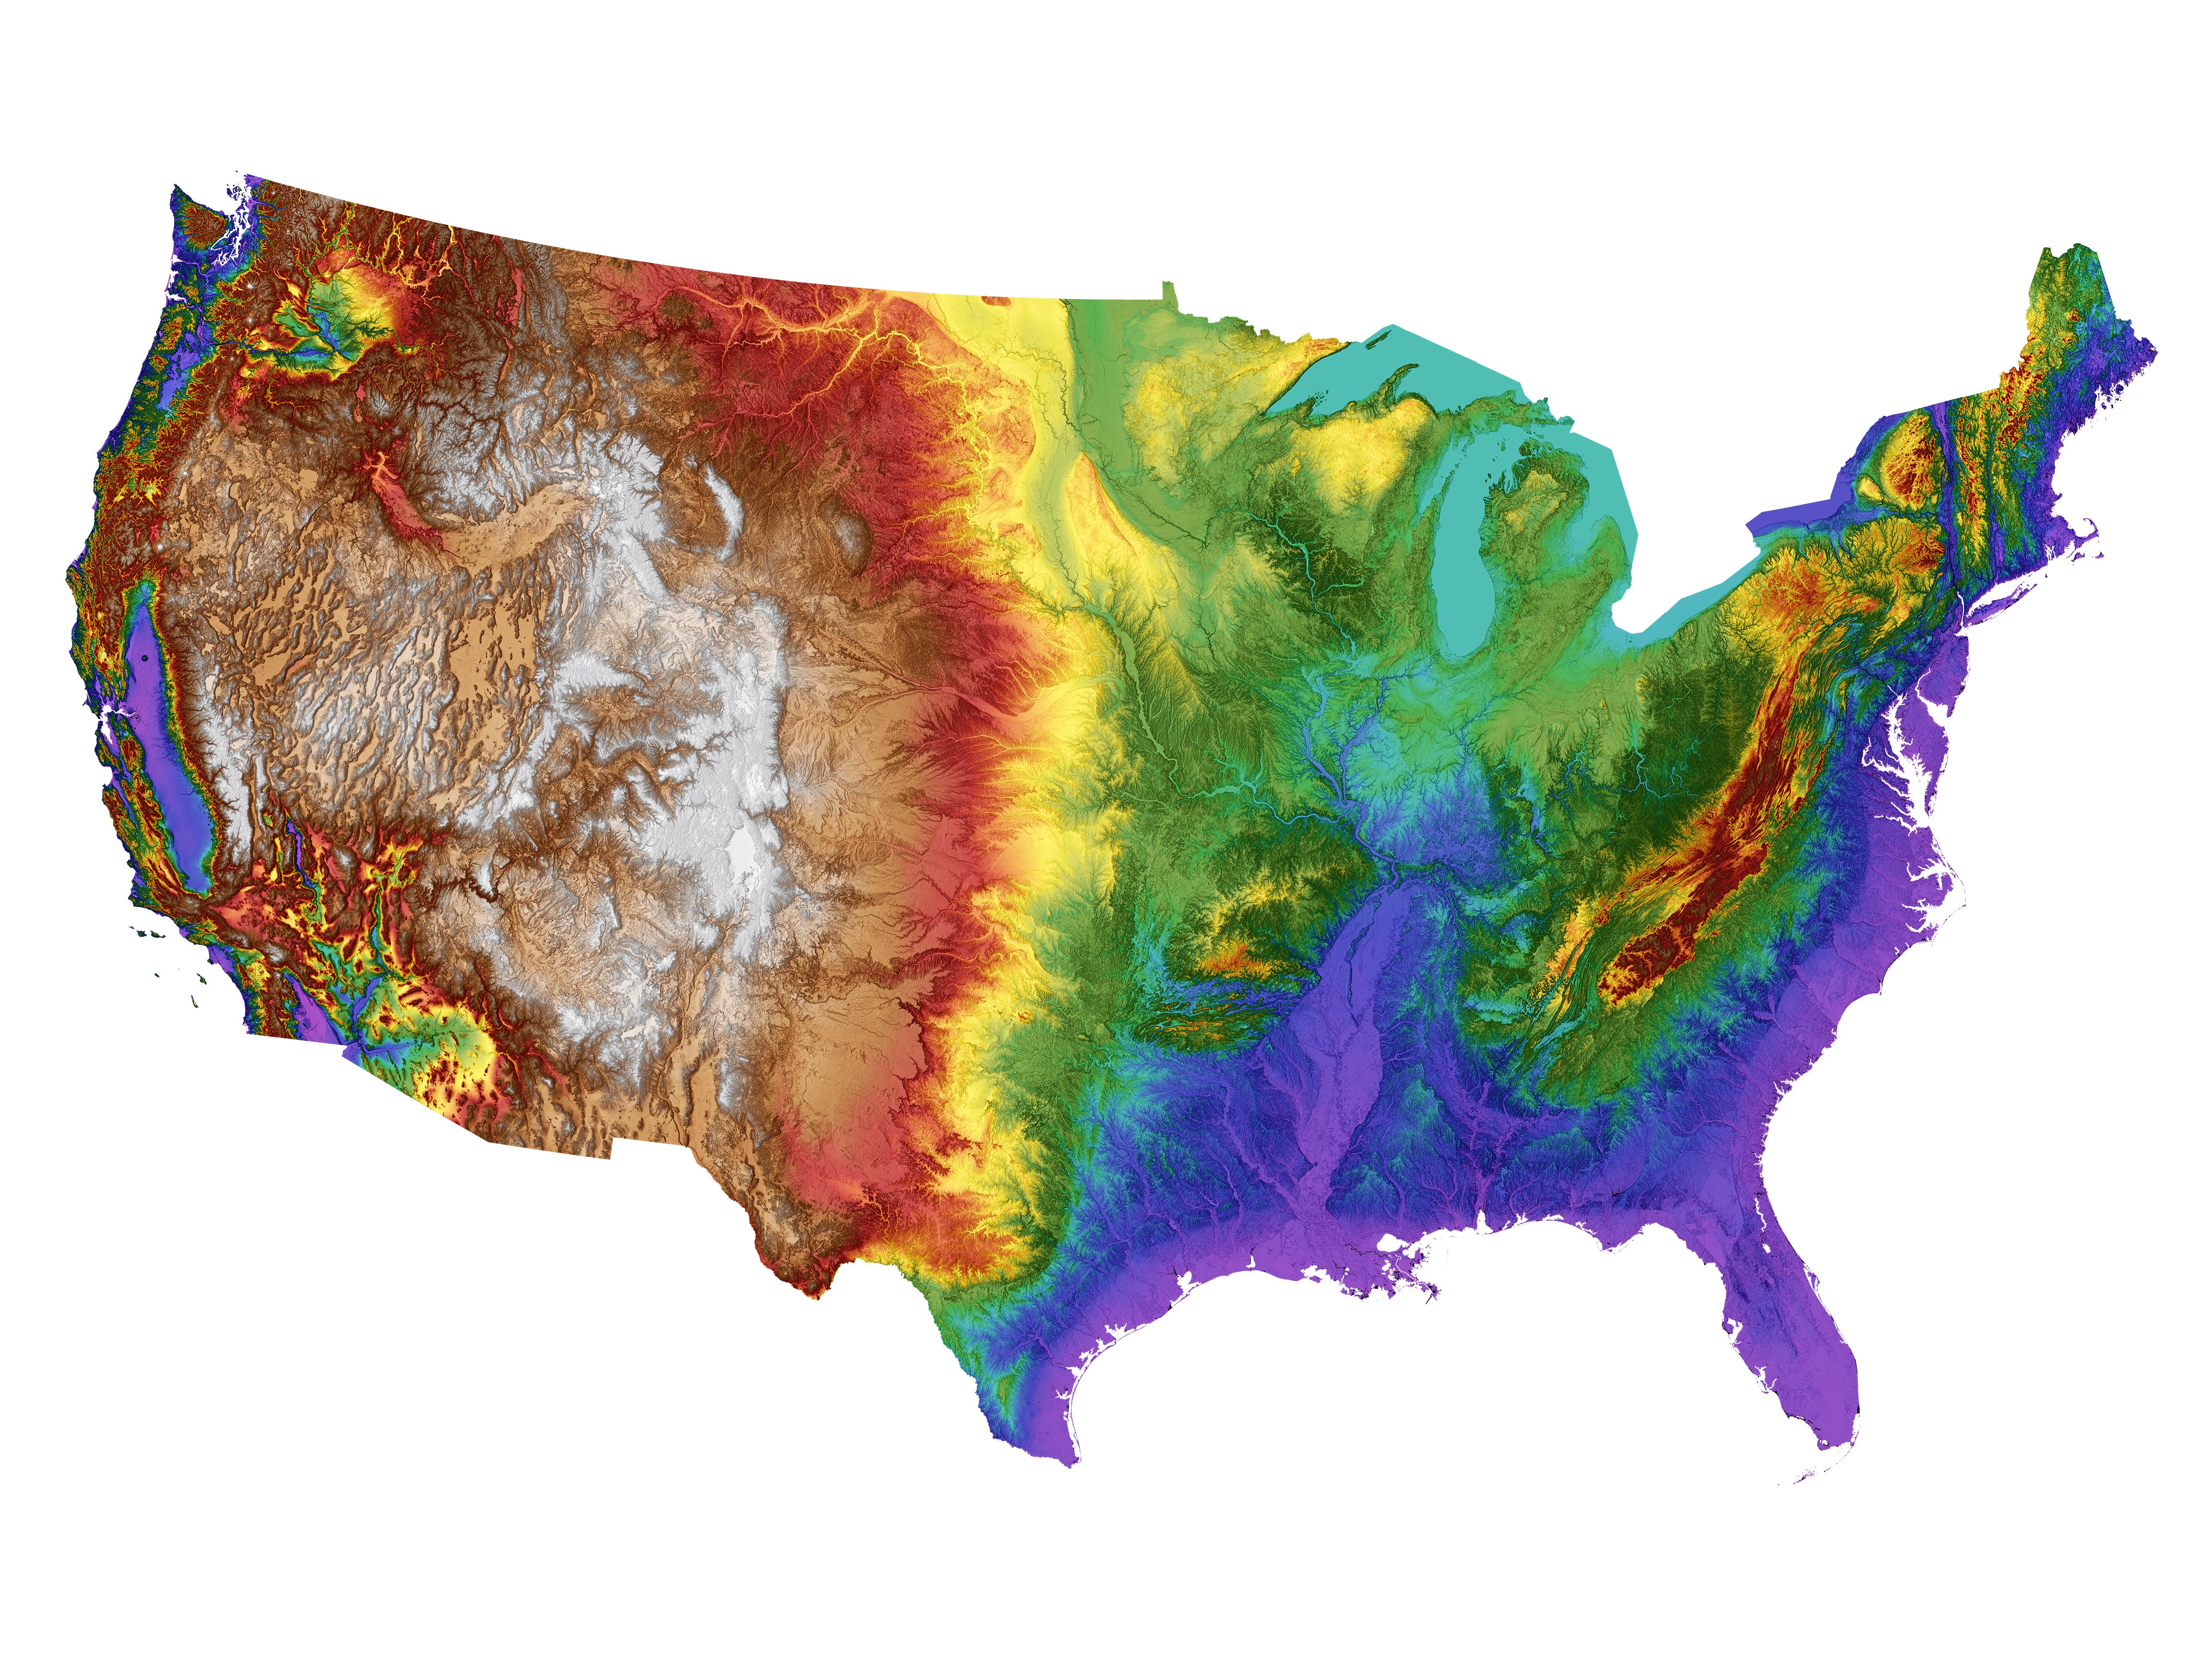 USA Color Elevation Map (Contiguous) Wall Art Poster Print With White Background